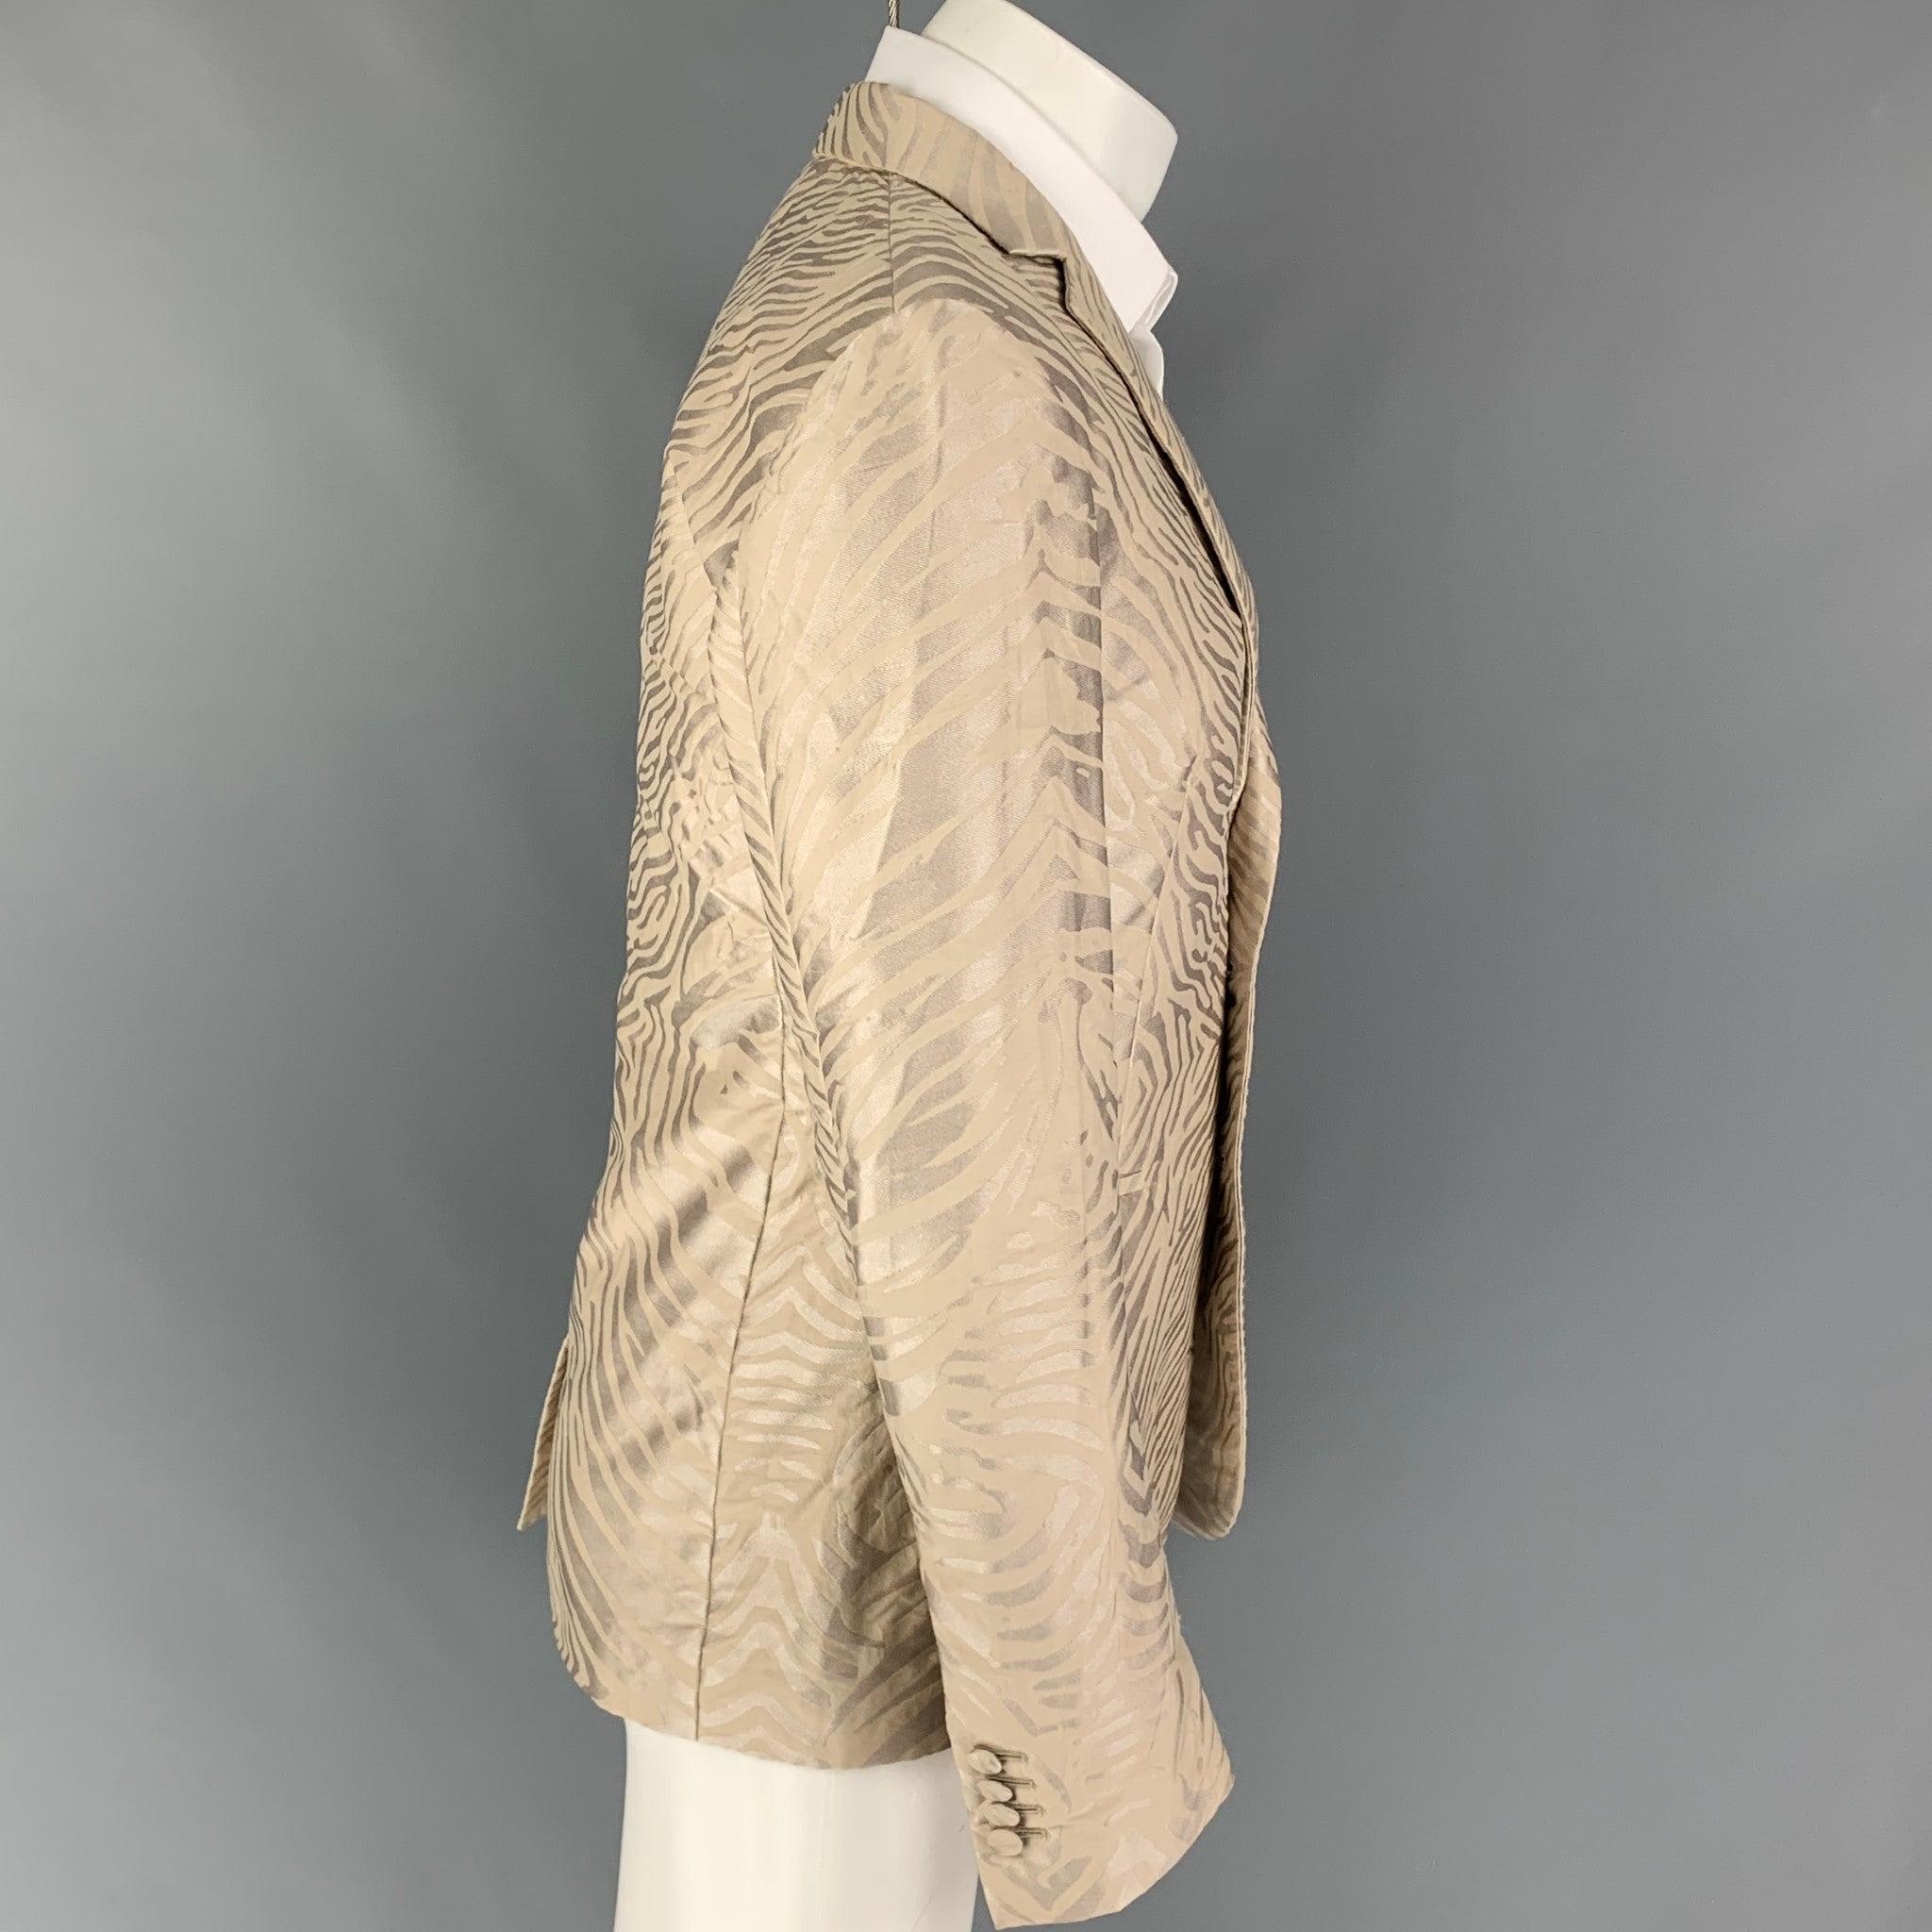 ROBERTO CAVALLI
sport coat comes in a tan jacquard polyester blend with a full liner featuring a notch lapel, slit pockets, single back vent, and a double button closure. Made in Italy. New With Tags.  

Marked:   48 

Measurements: 
 
Shoulder: